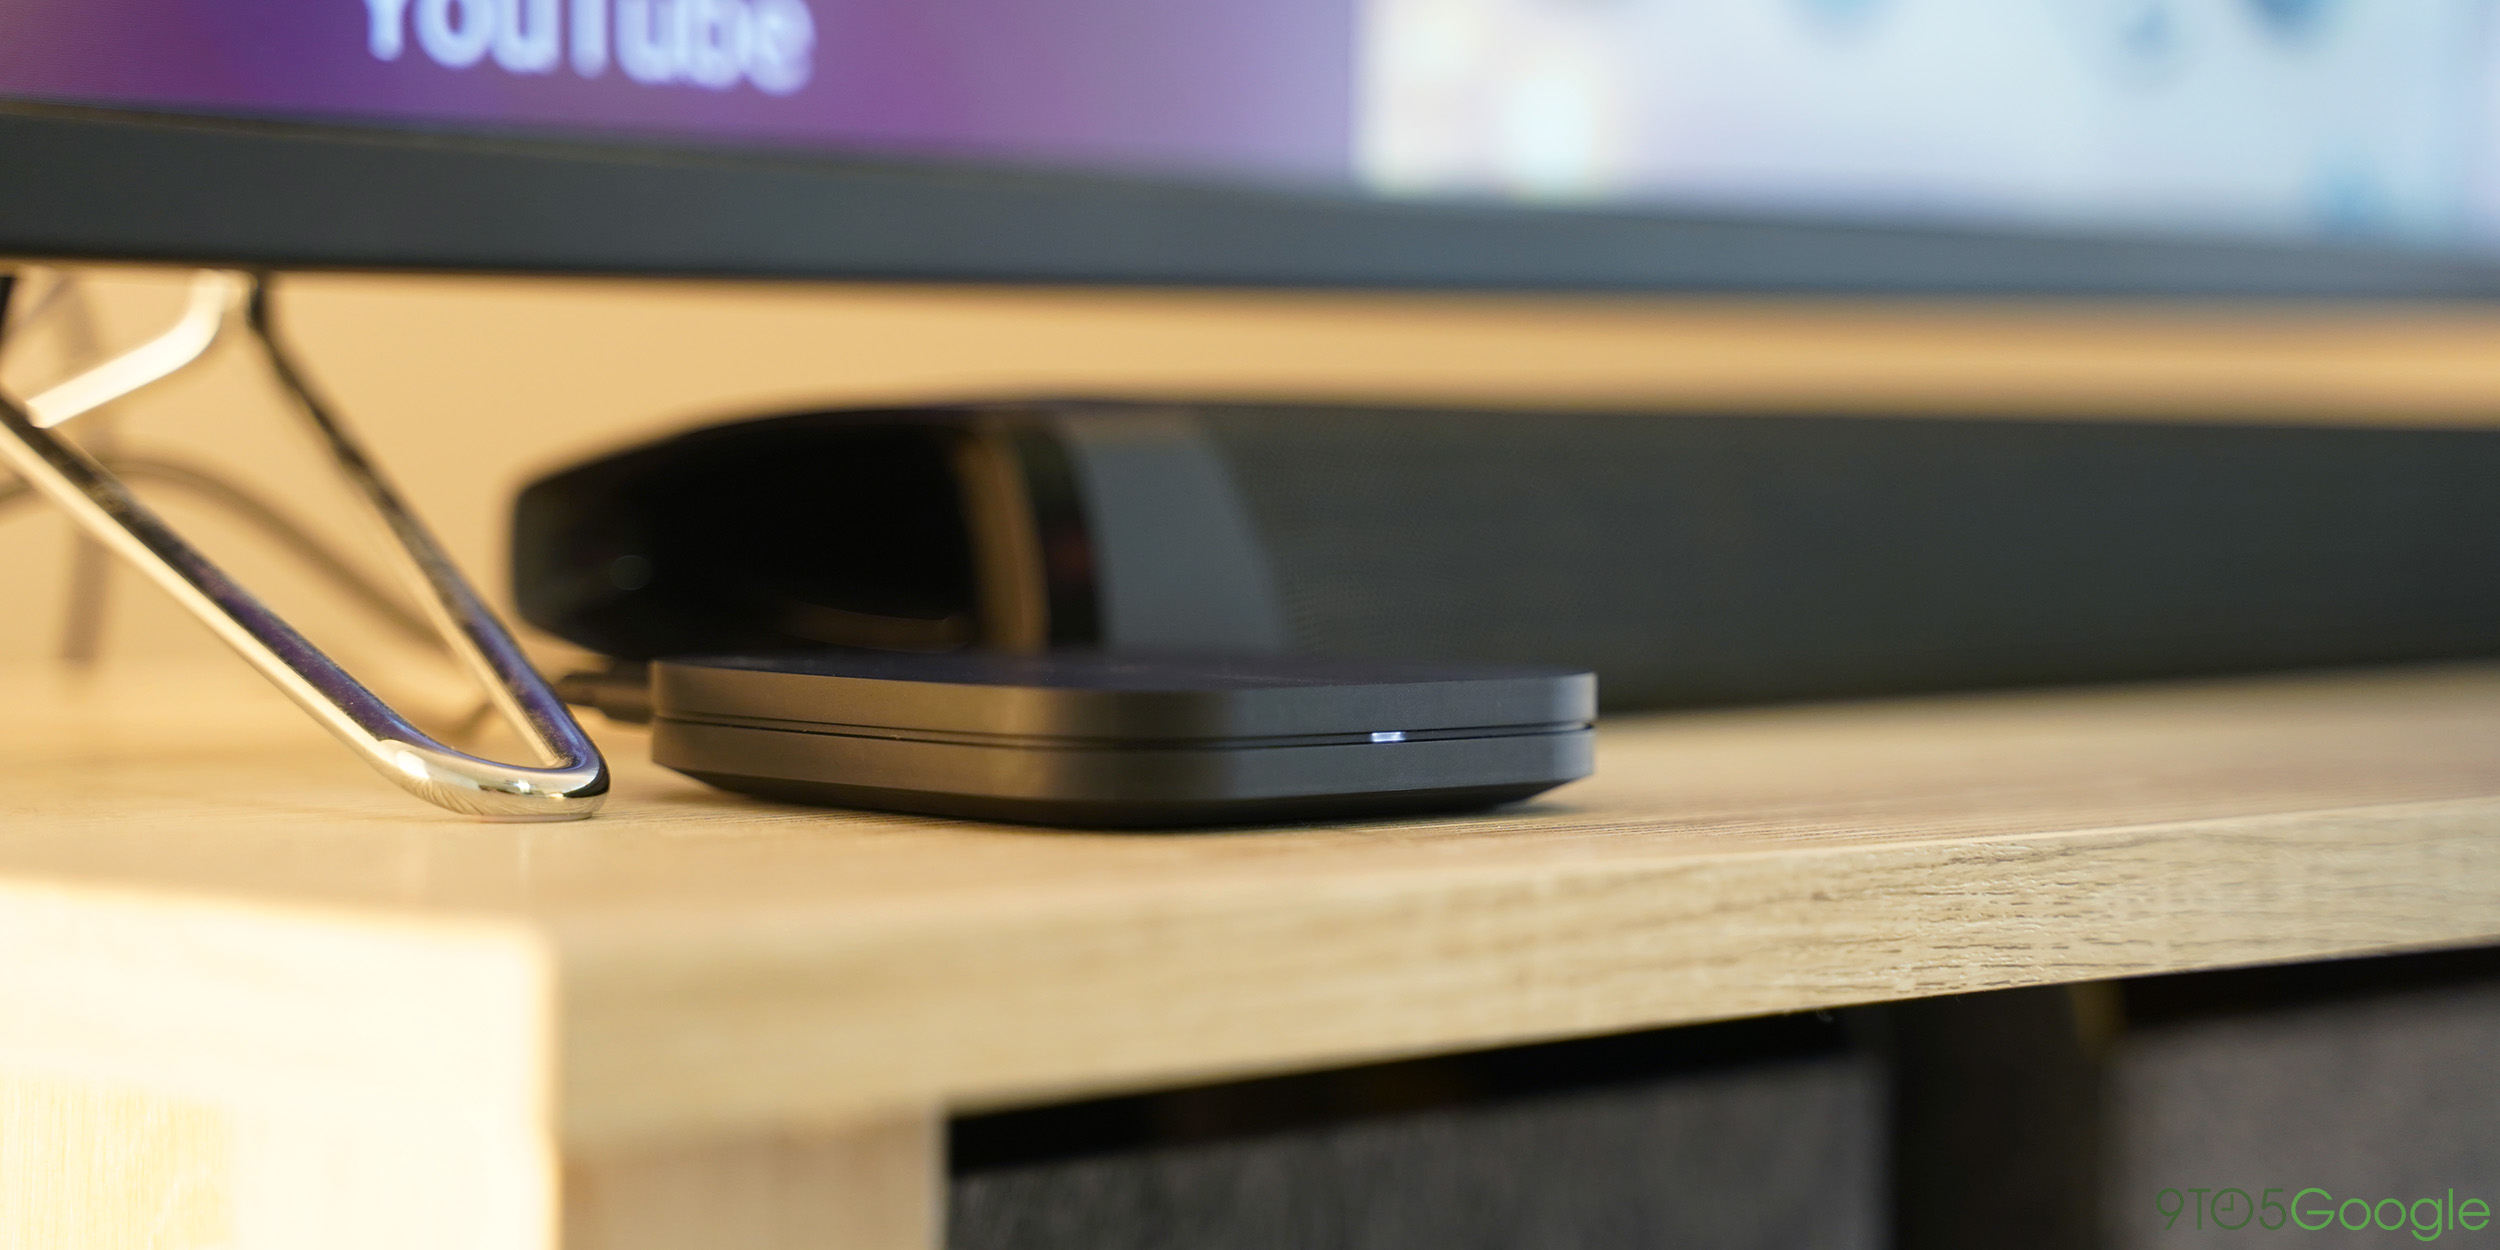 Xiaomi Mi Box S Review: The best Android TV for most users - 9to5Google